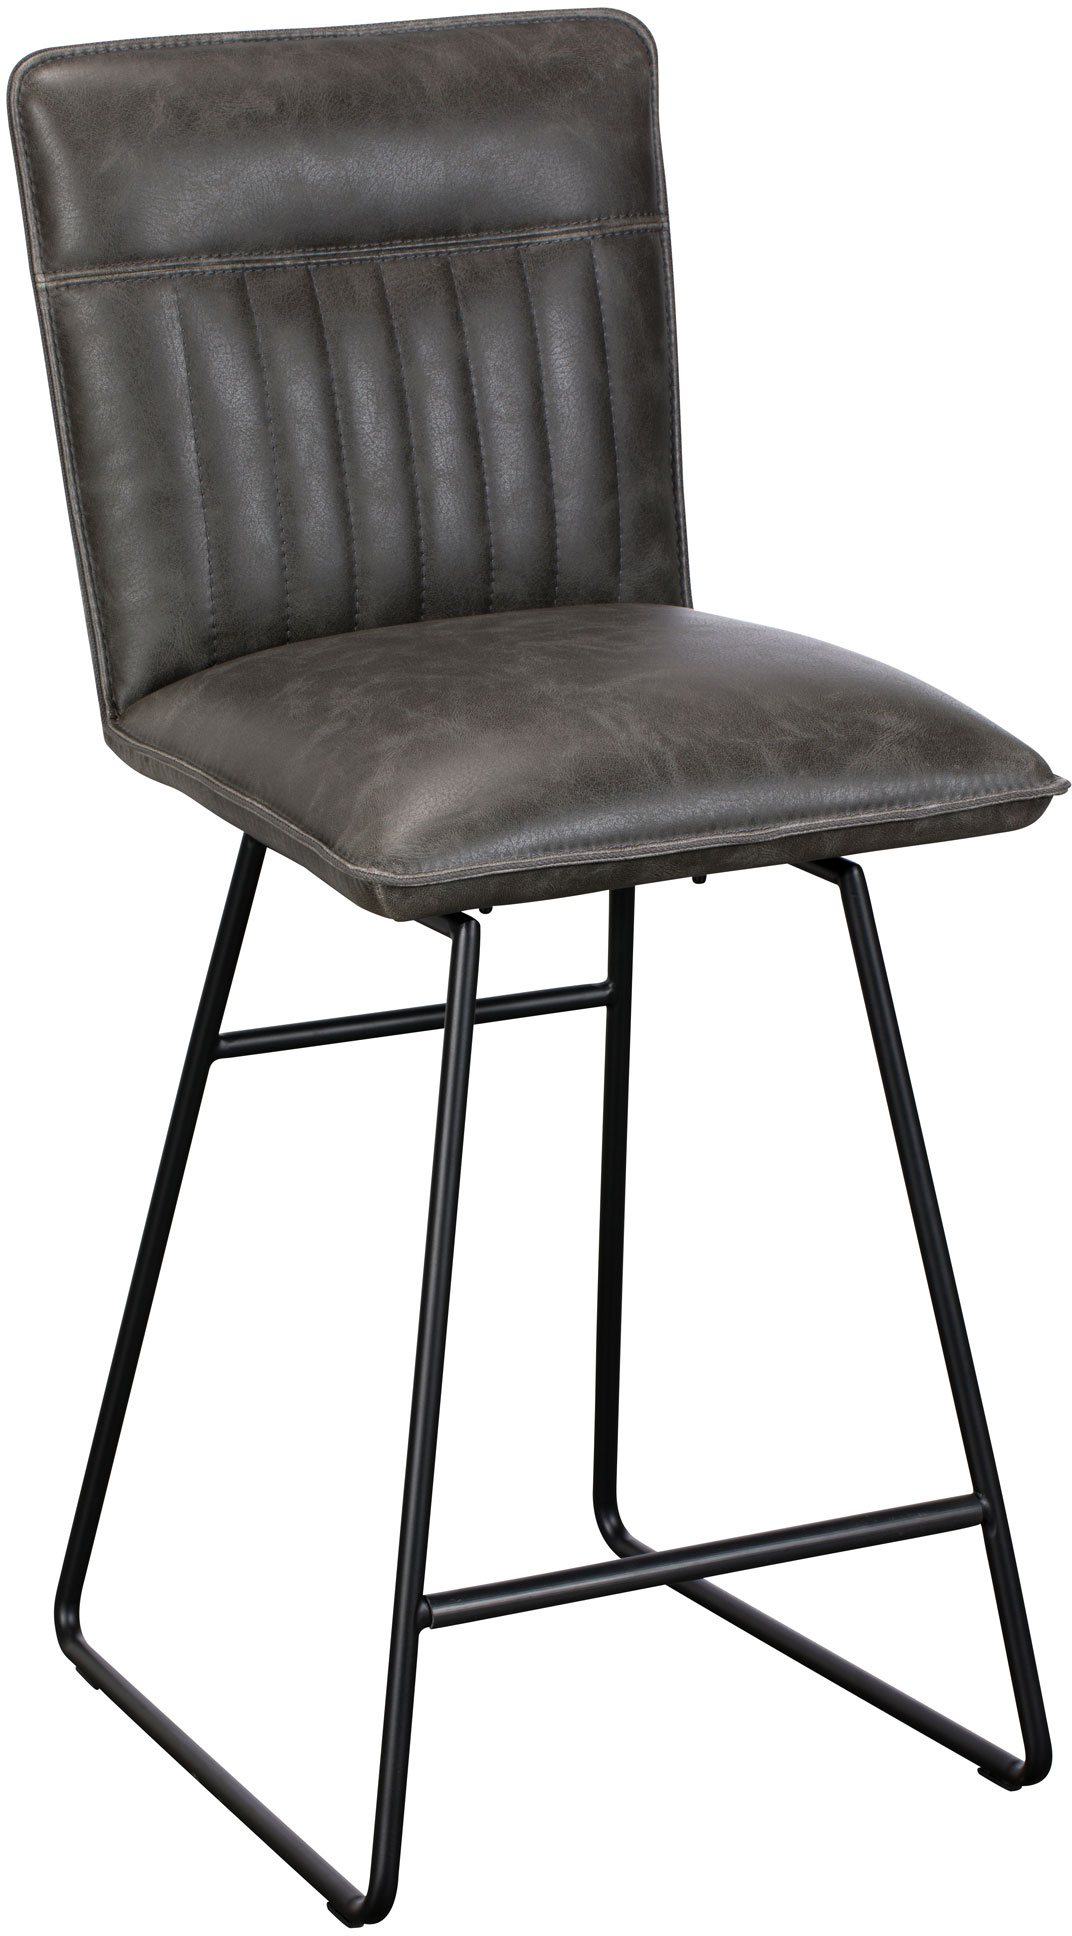 Cooper Swivel Bar Stool In Grey Faux, Gray Leather Bar Stools